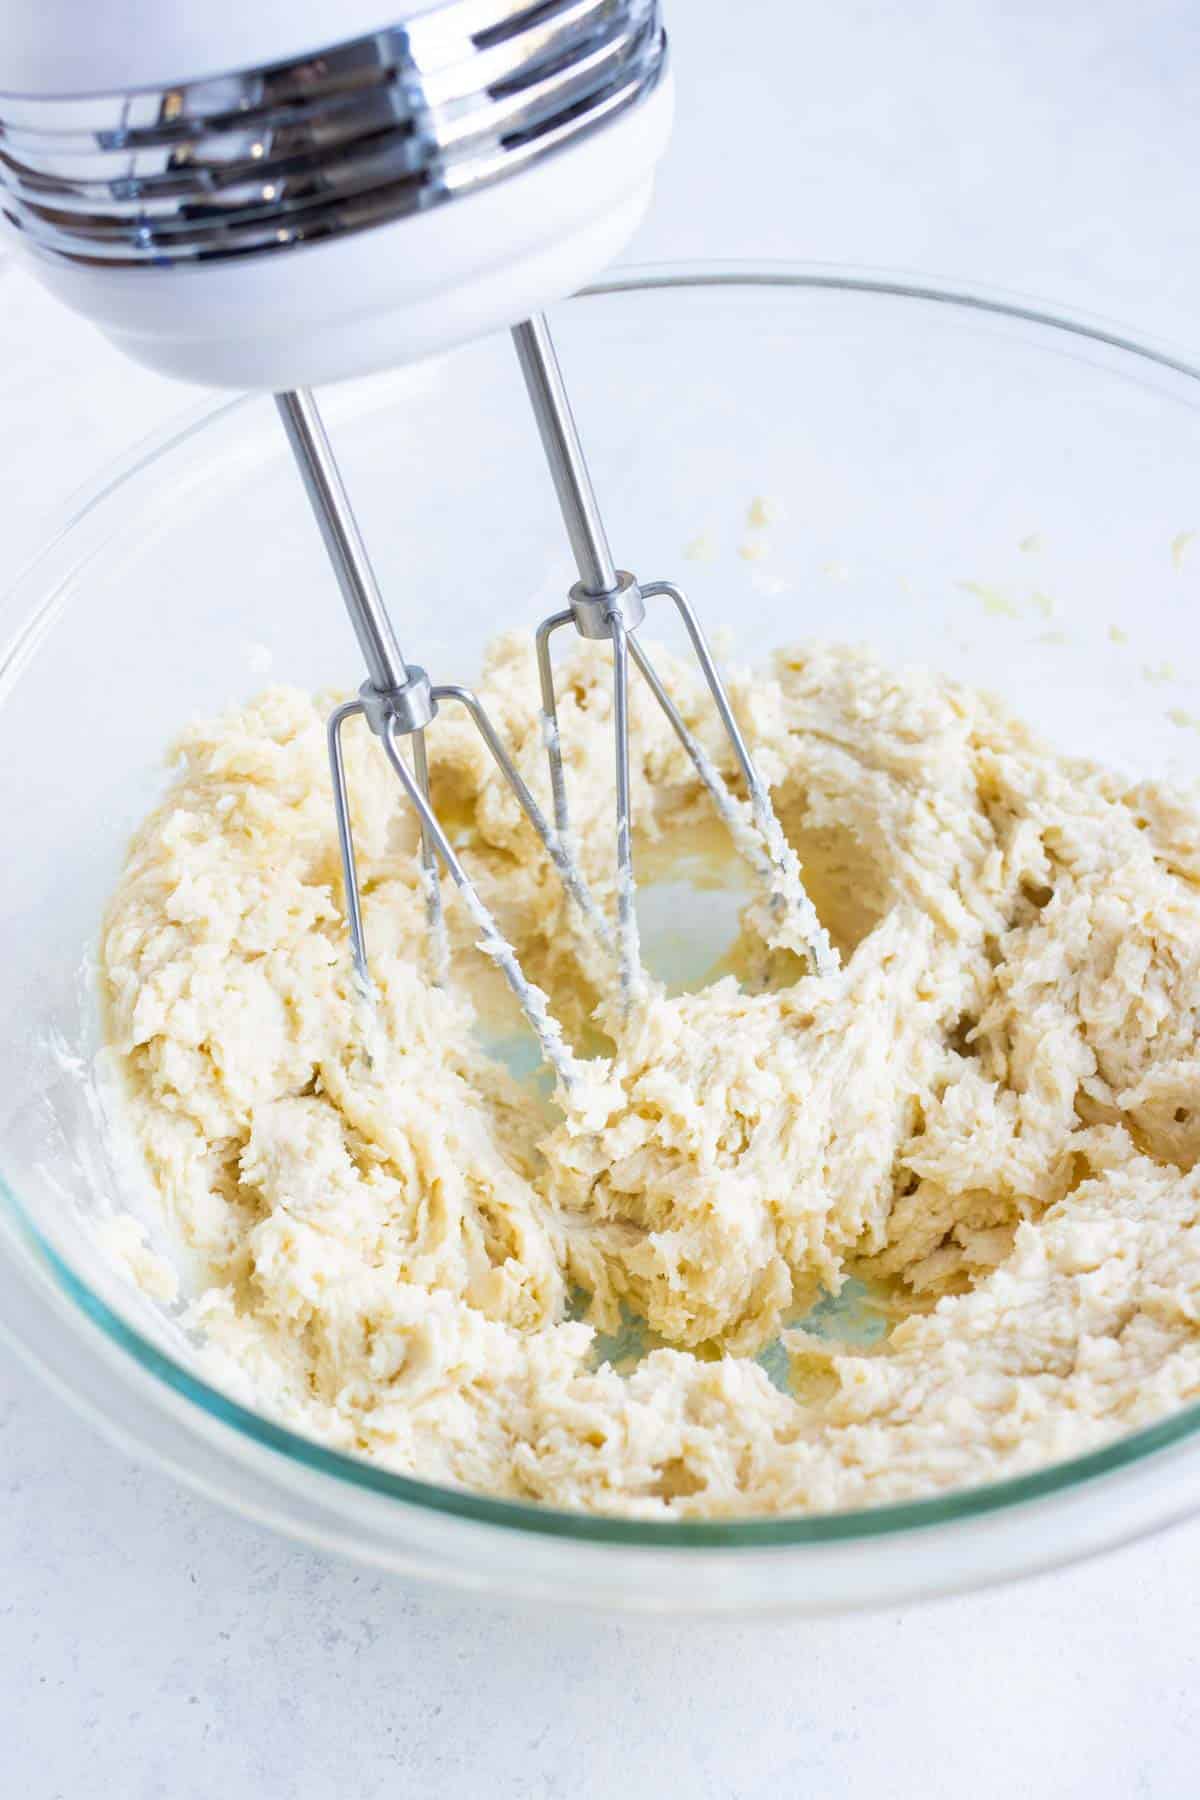 A hand mixer beats the egg, butter, and sugar together.